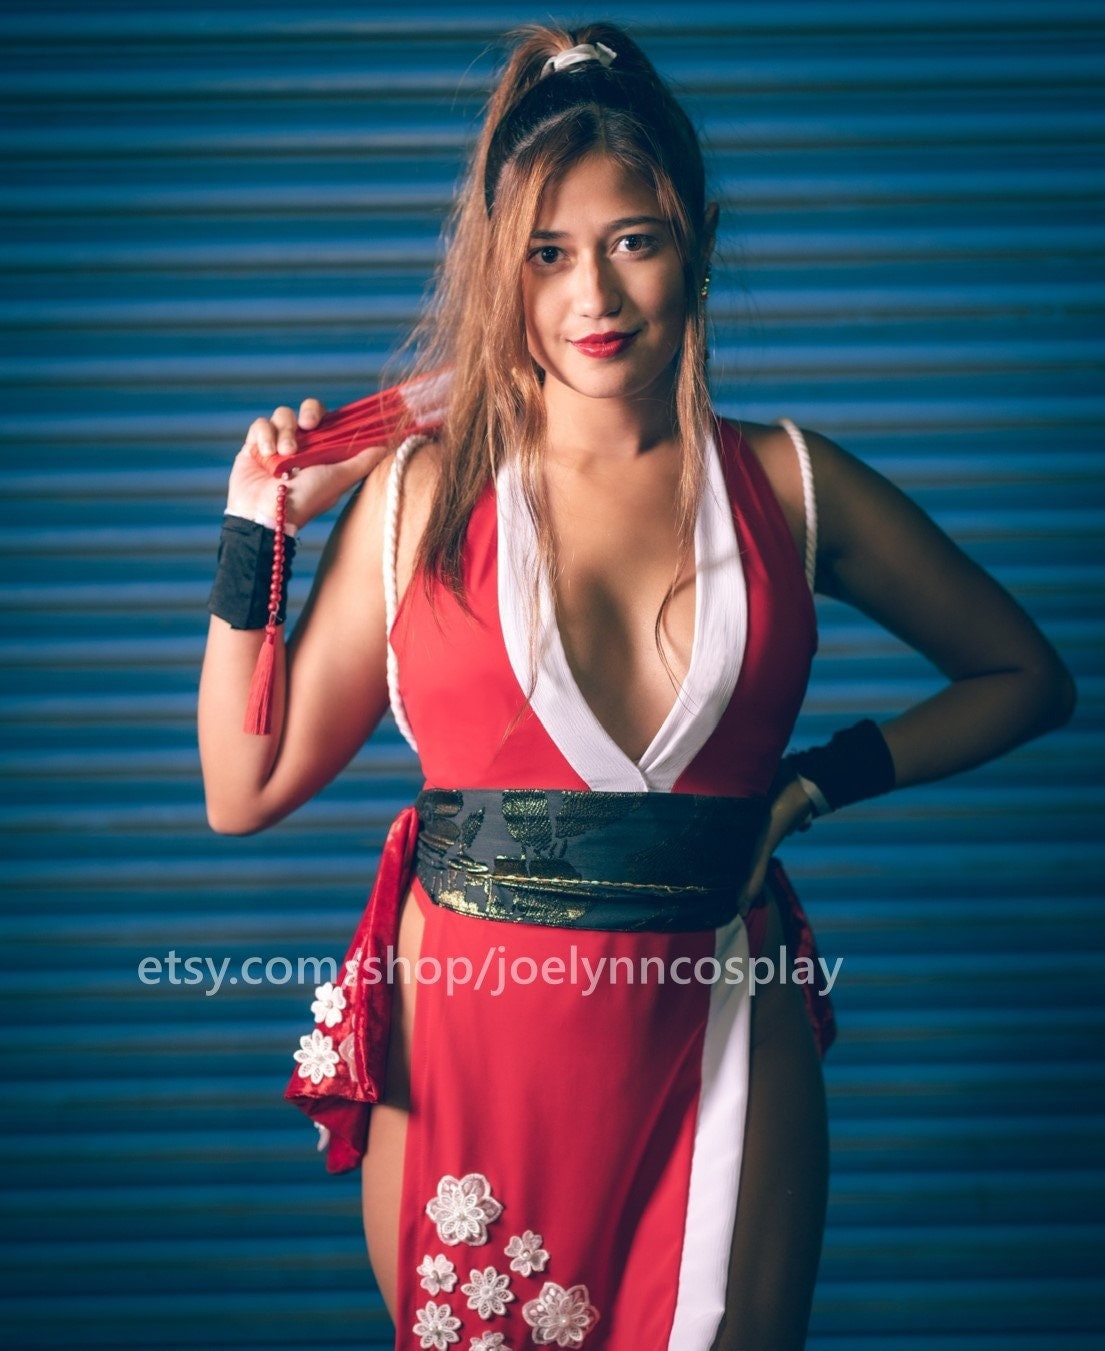 christopher hoffmann recommends mai shiranui cosplay xxx pic